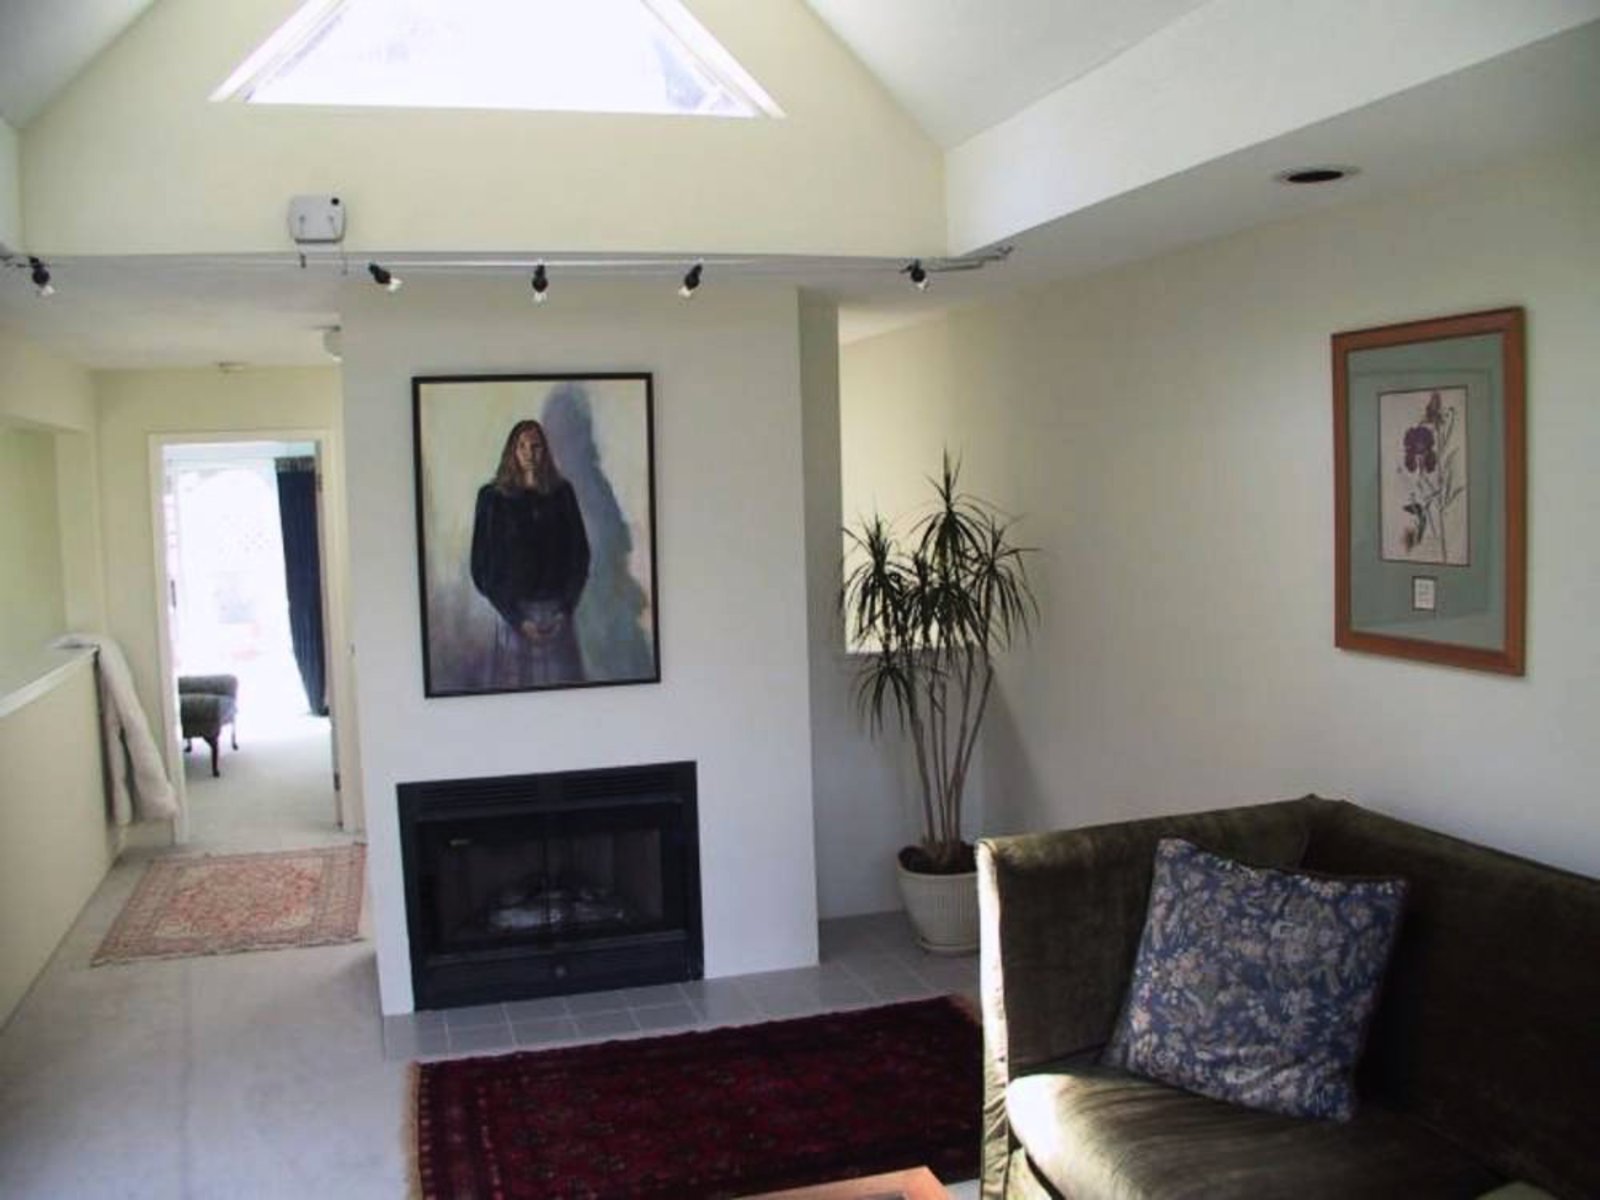 Living Room Fireplace Vaulted Ceiling